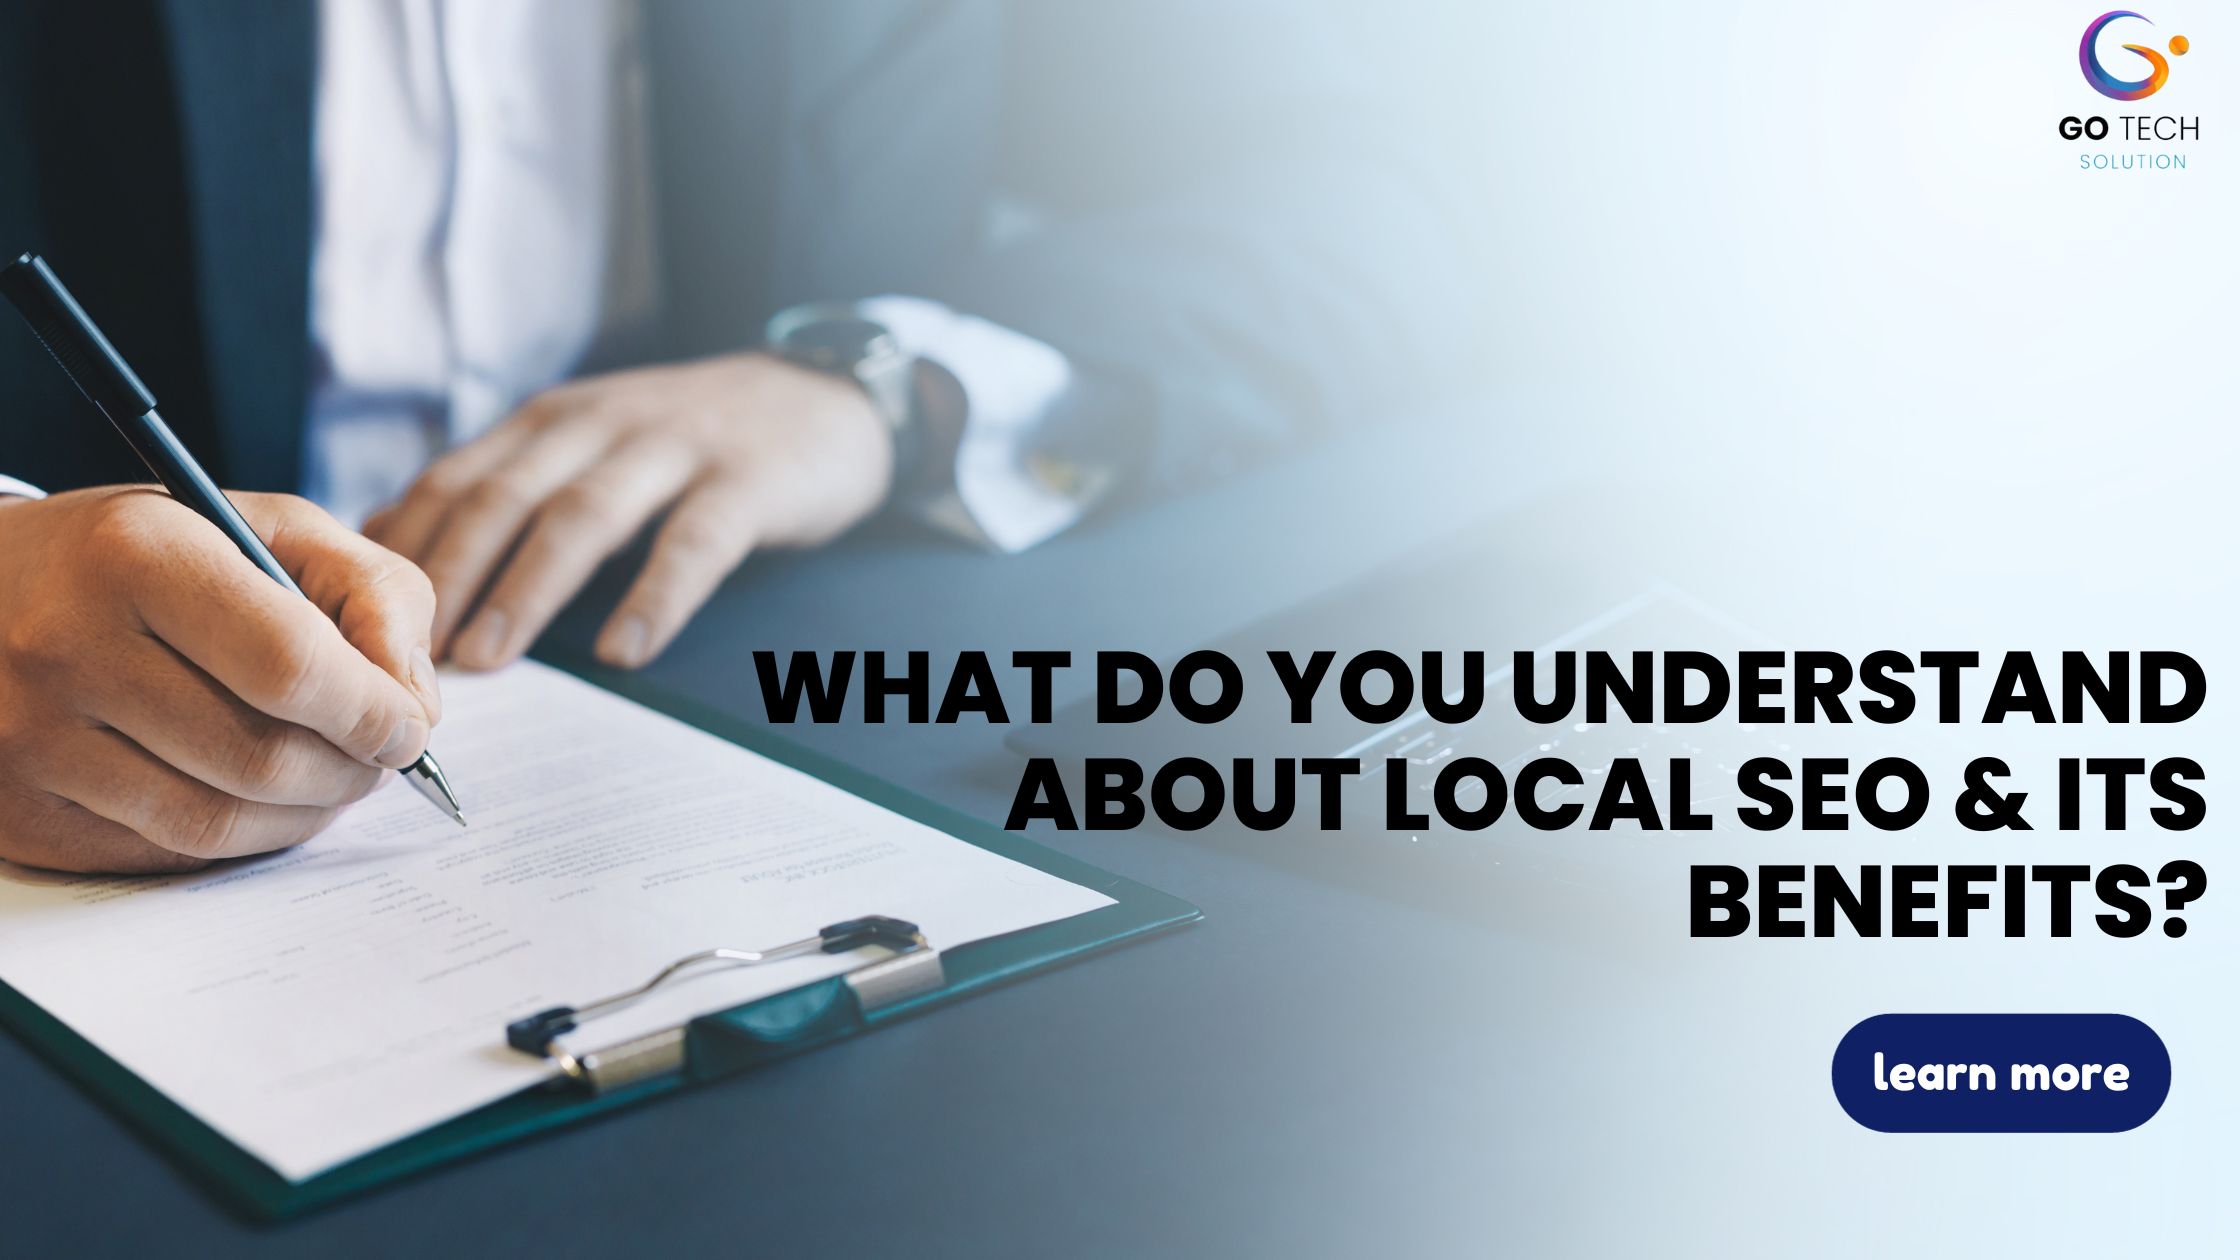 What do you understand about Local SEO & its Benefits?